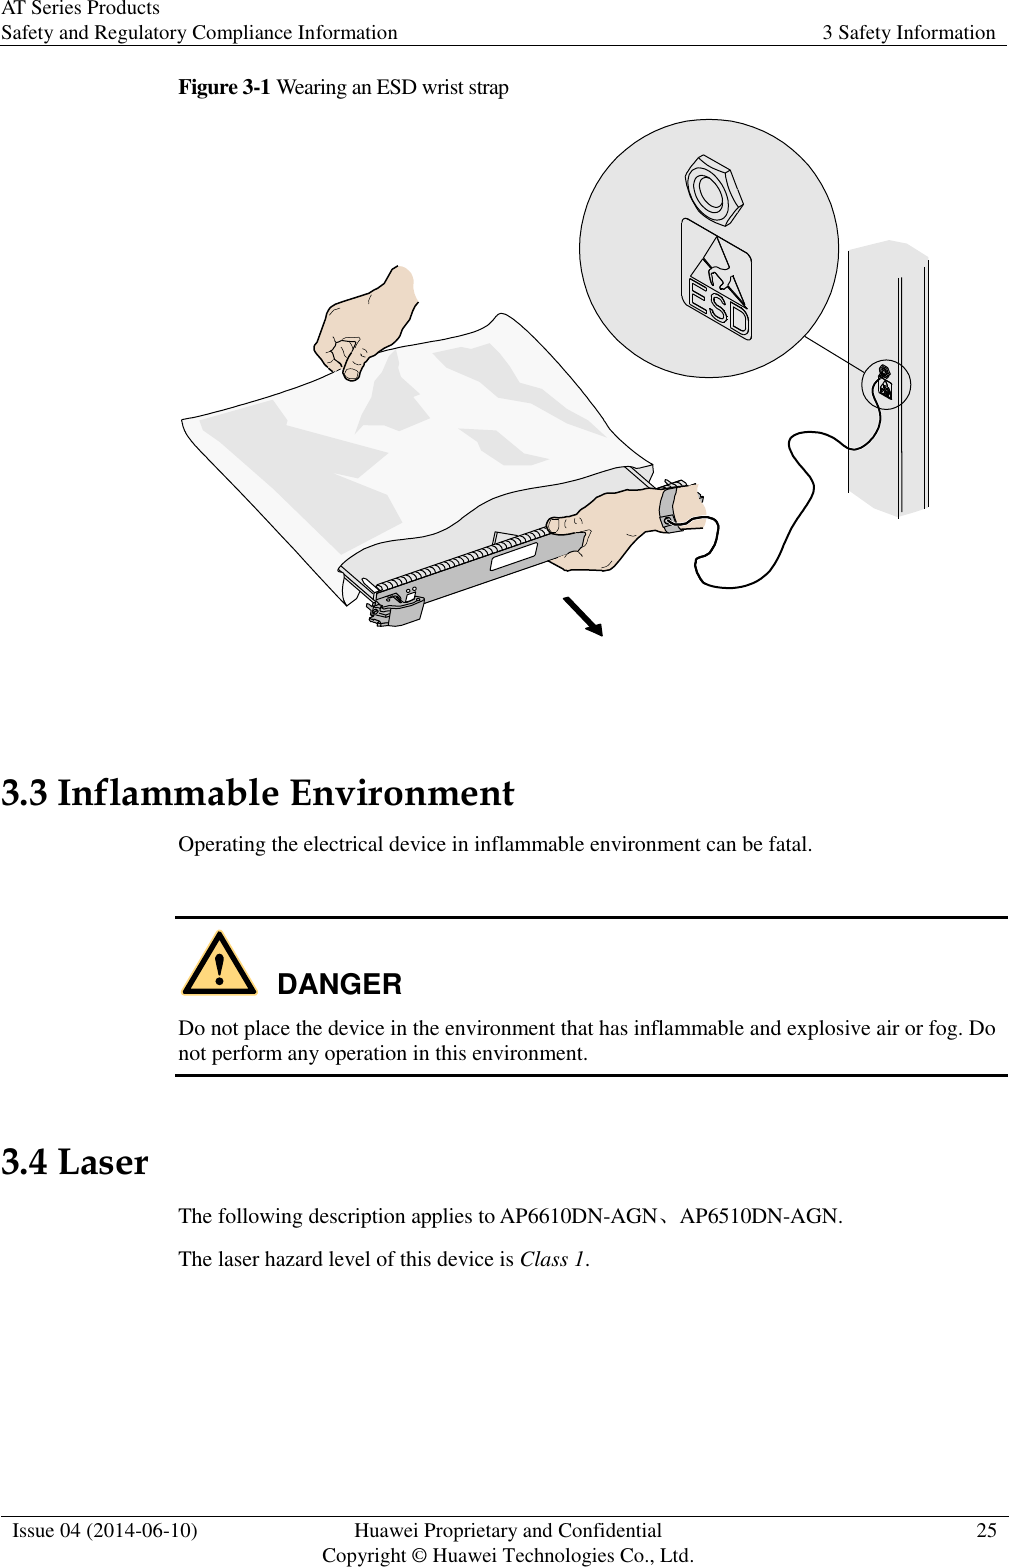 AT Series Products Safety and Regulatory Compliance Information 3 Safety Information  Issue 04 (2014-06-10) Huawei Proprietary and Confidential           Copyright © Huawei Technologies Co., Ltd. 25  Figure 3-1 Wearing an ESD wrist strap   3.3 Inflammable Environment Operating the electrical device in inflammable environment can be fatal.  DANGER Do not place the device in the environment that has inflammable and explosive air or fog. Do not perform any operation in this environment. 3.4 Laser The following description applies to AP6610DN-AGN、AP6510DN-AGN. The laser hazard level of this device is Class 1.  